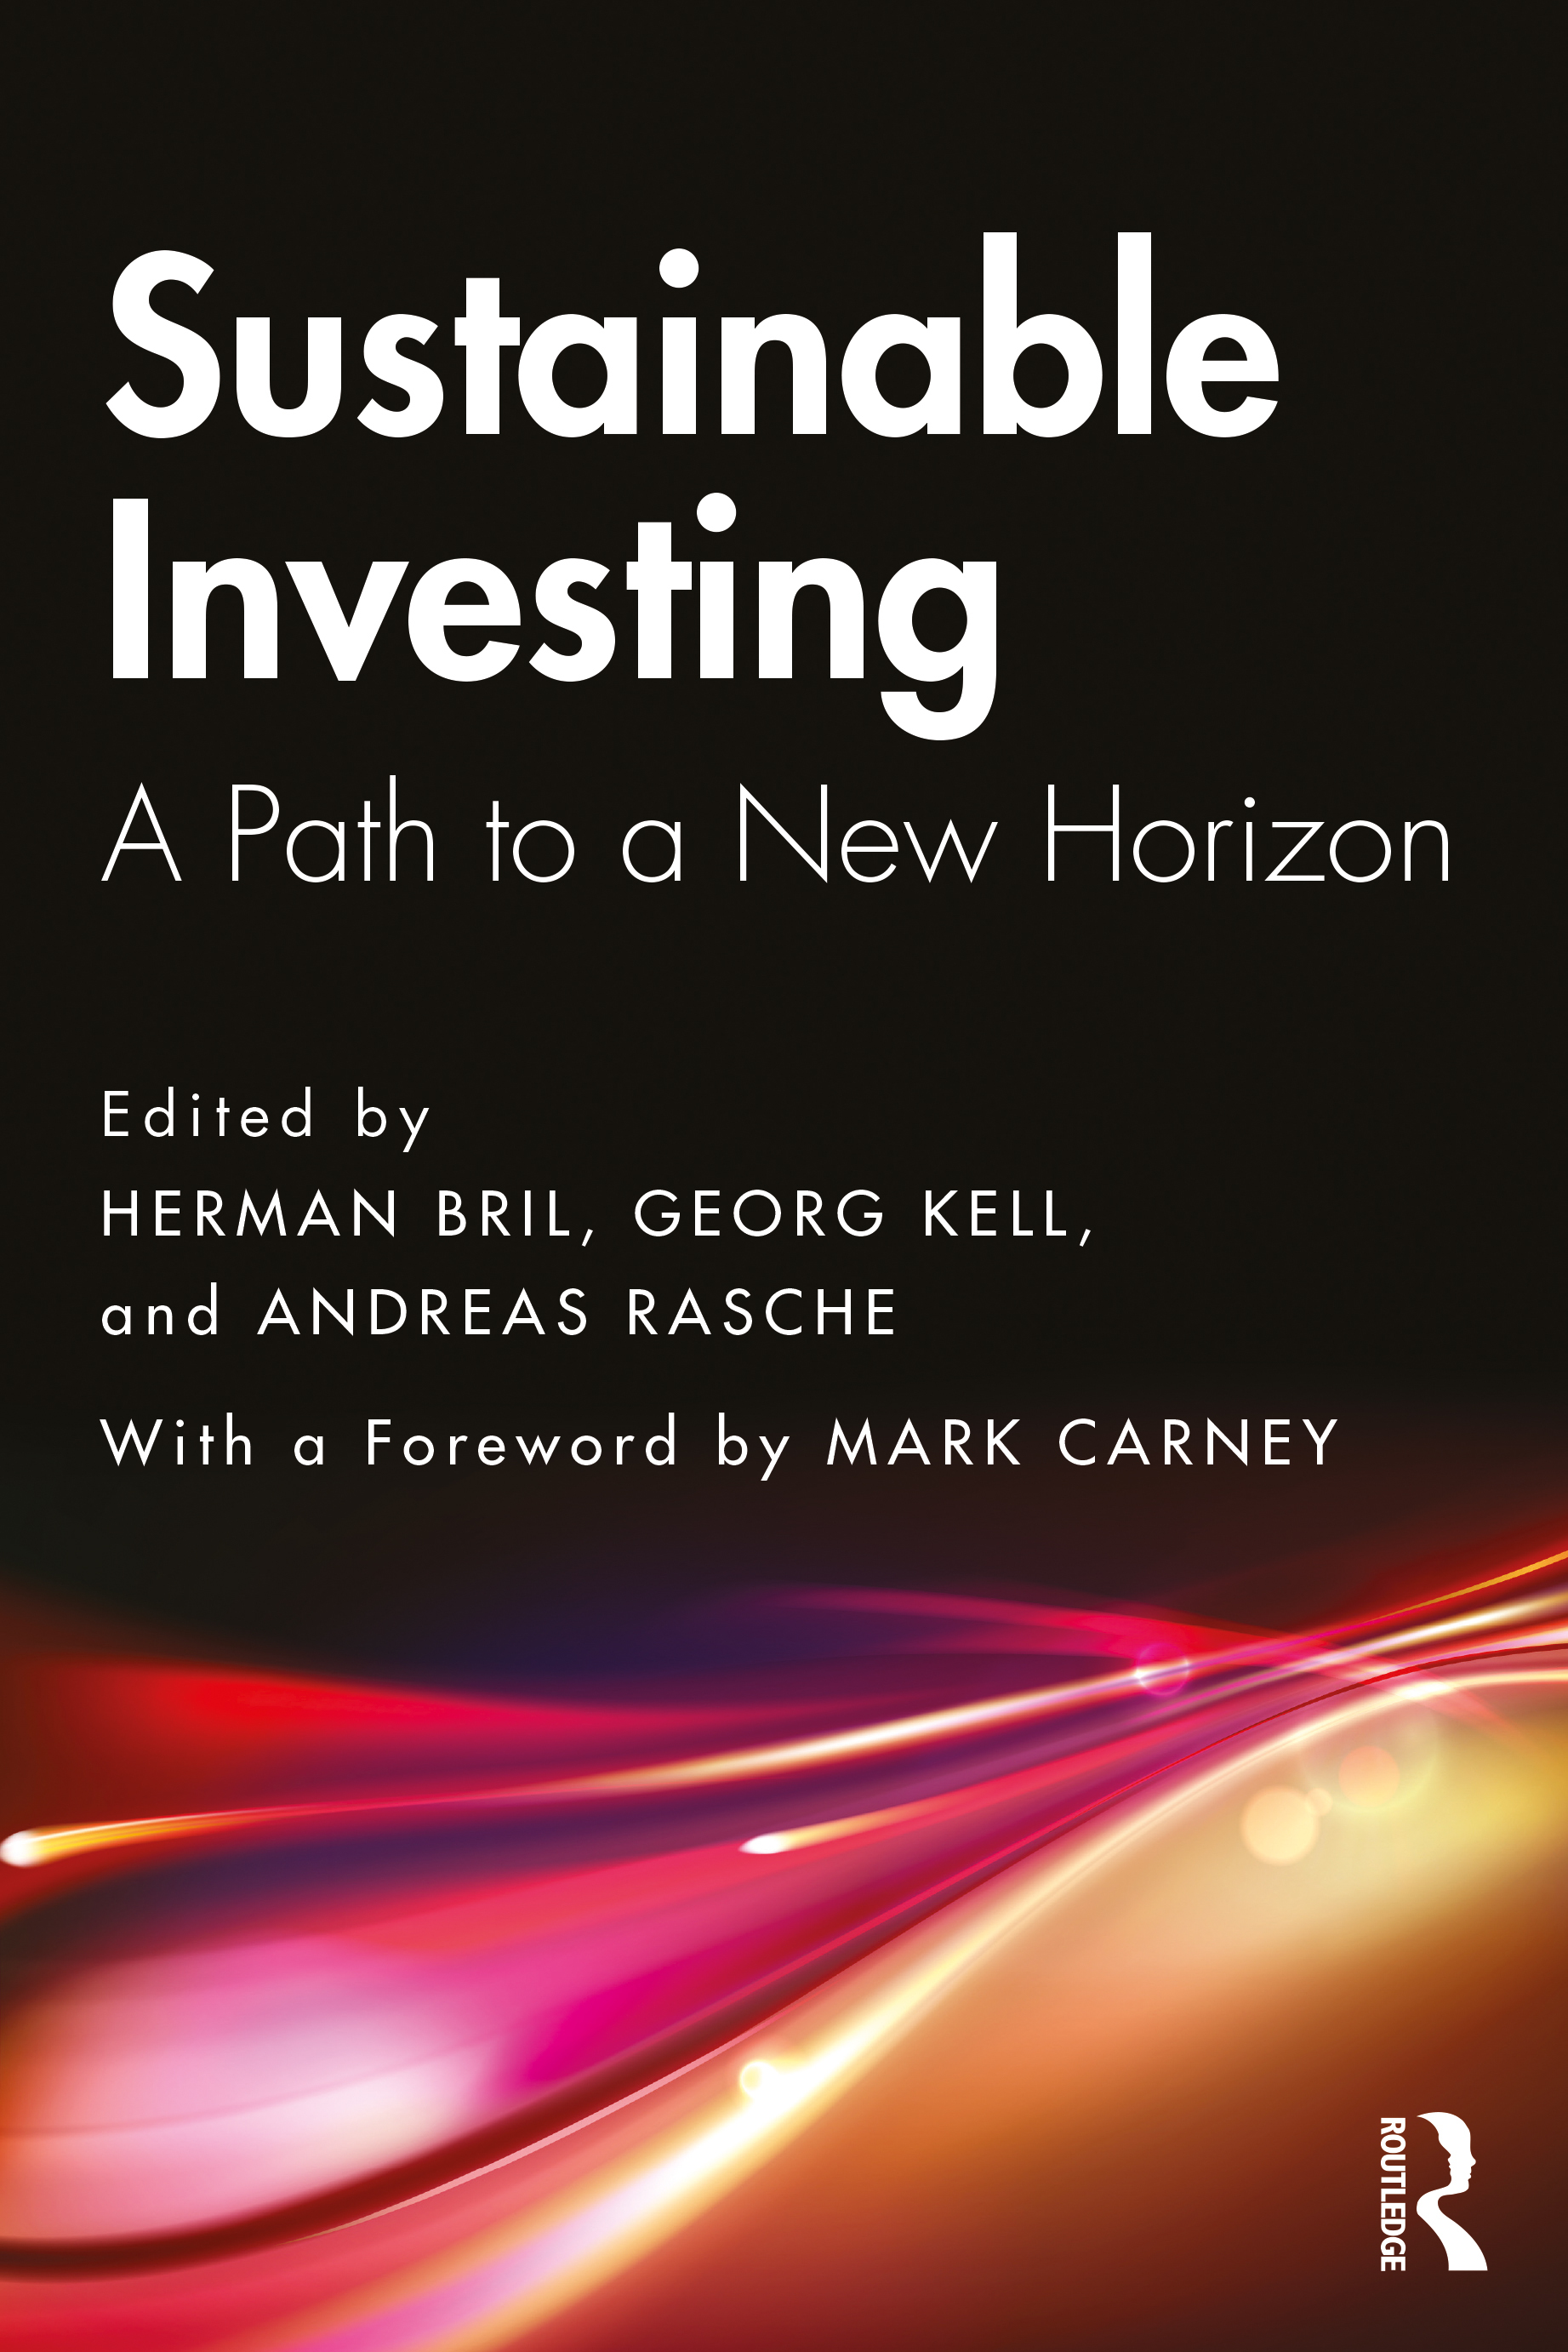 Sustainable Investing: A Path to a New Horizon, looks at the historic convergence between corporate sustainability and sustainable investing.